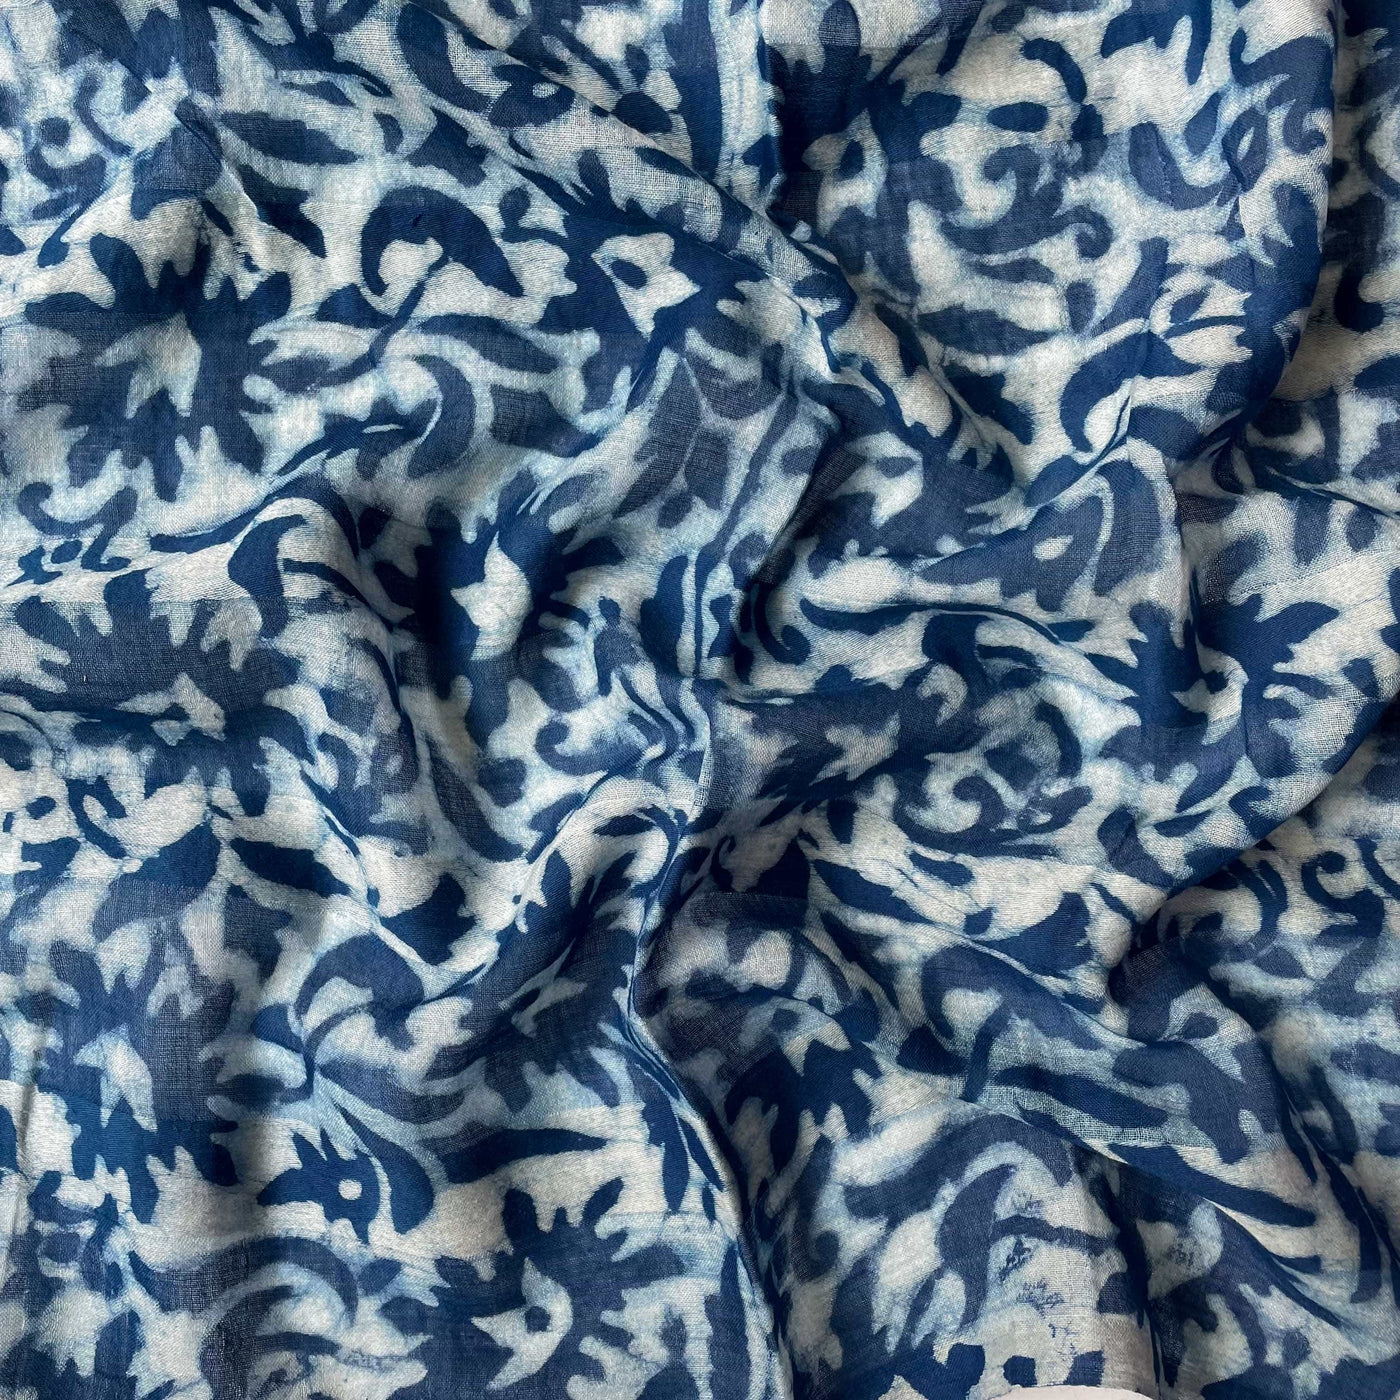 Hand Block Printed Cotton Fabric Fabric Indigo Dabu Natural Dyed Abstract Floral Hand Block Printed Pure Cotton Fabric (Width 42 Inches)